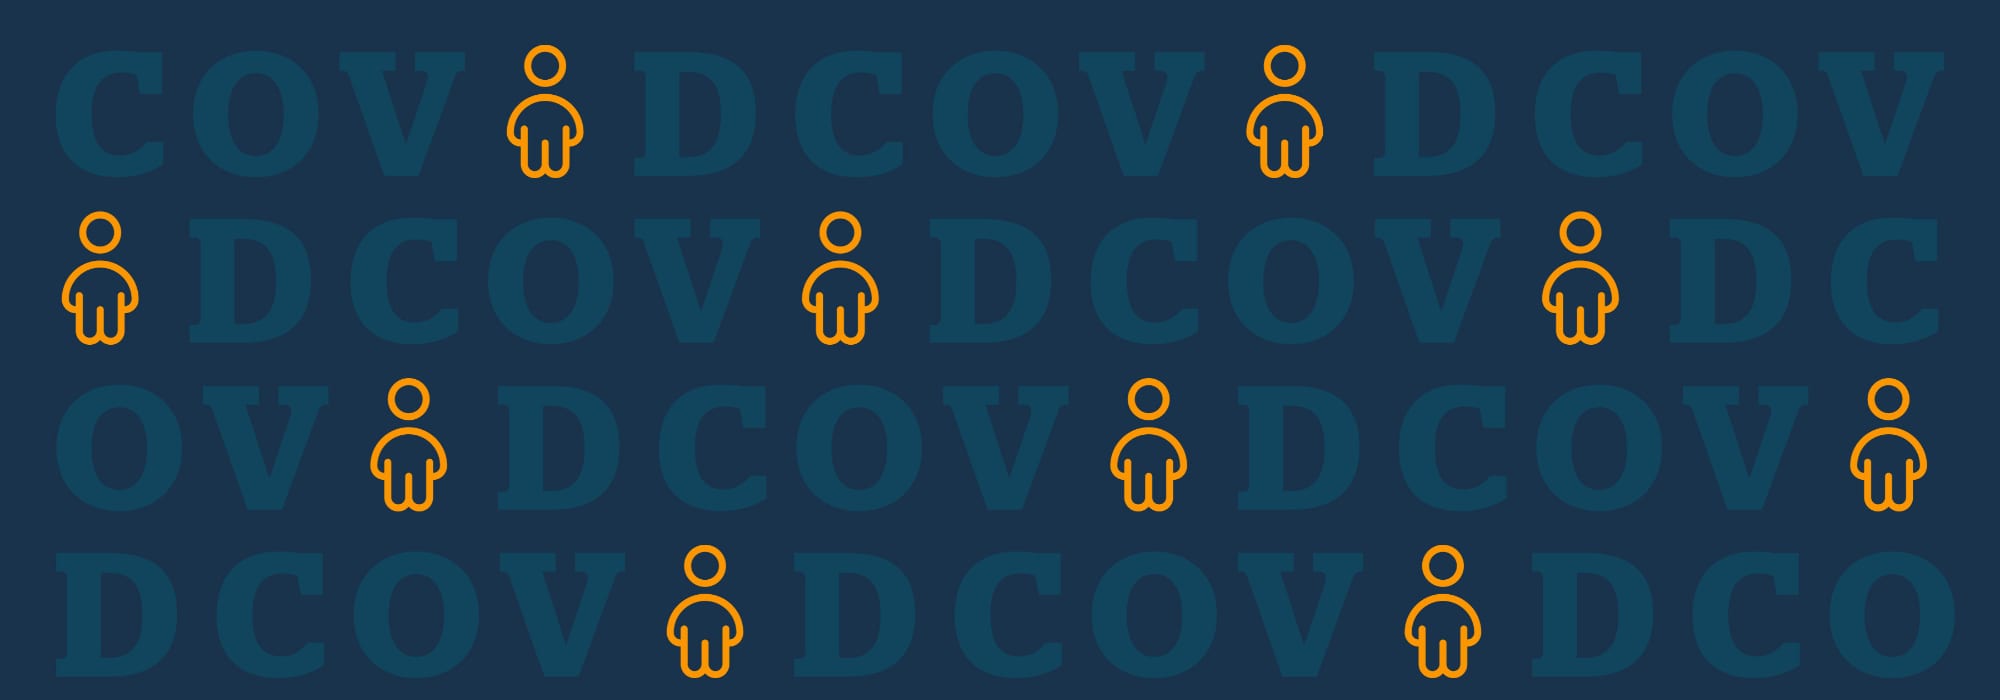 COVID illustration with icons of people